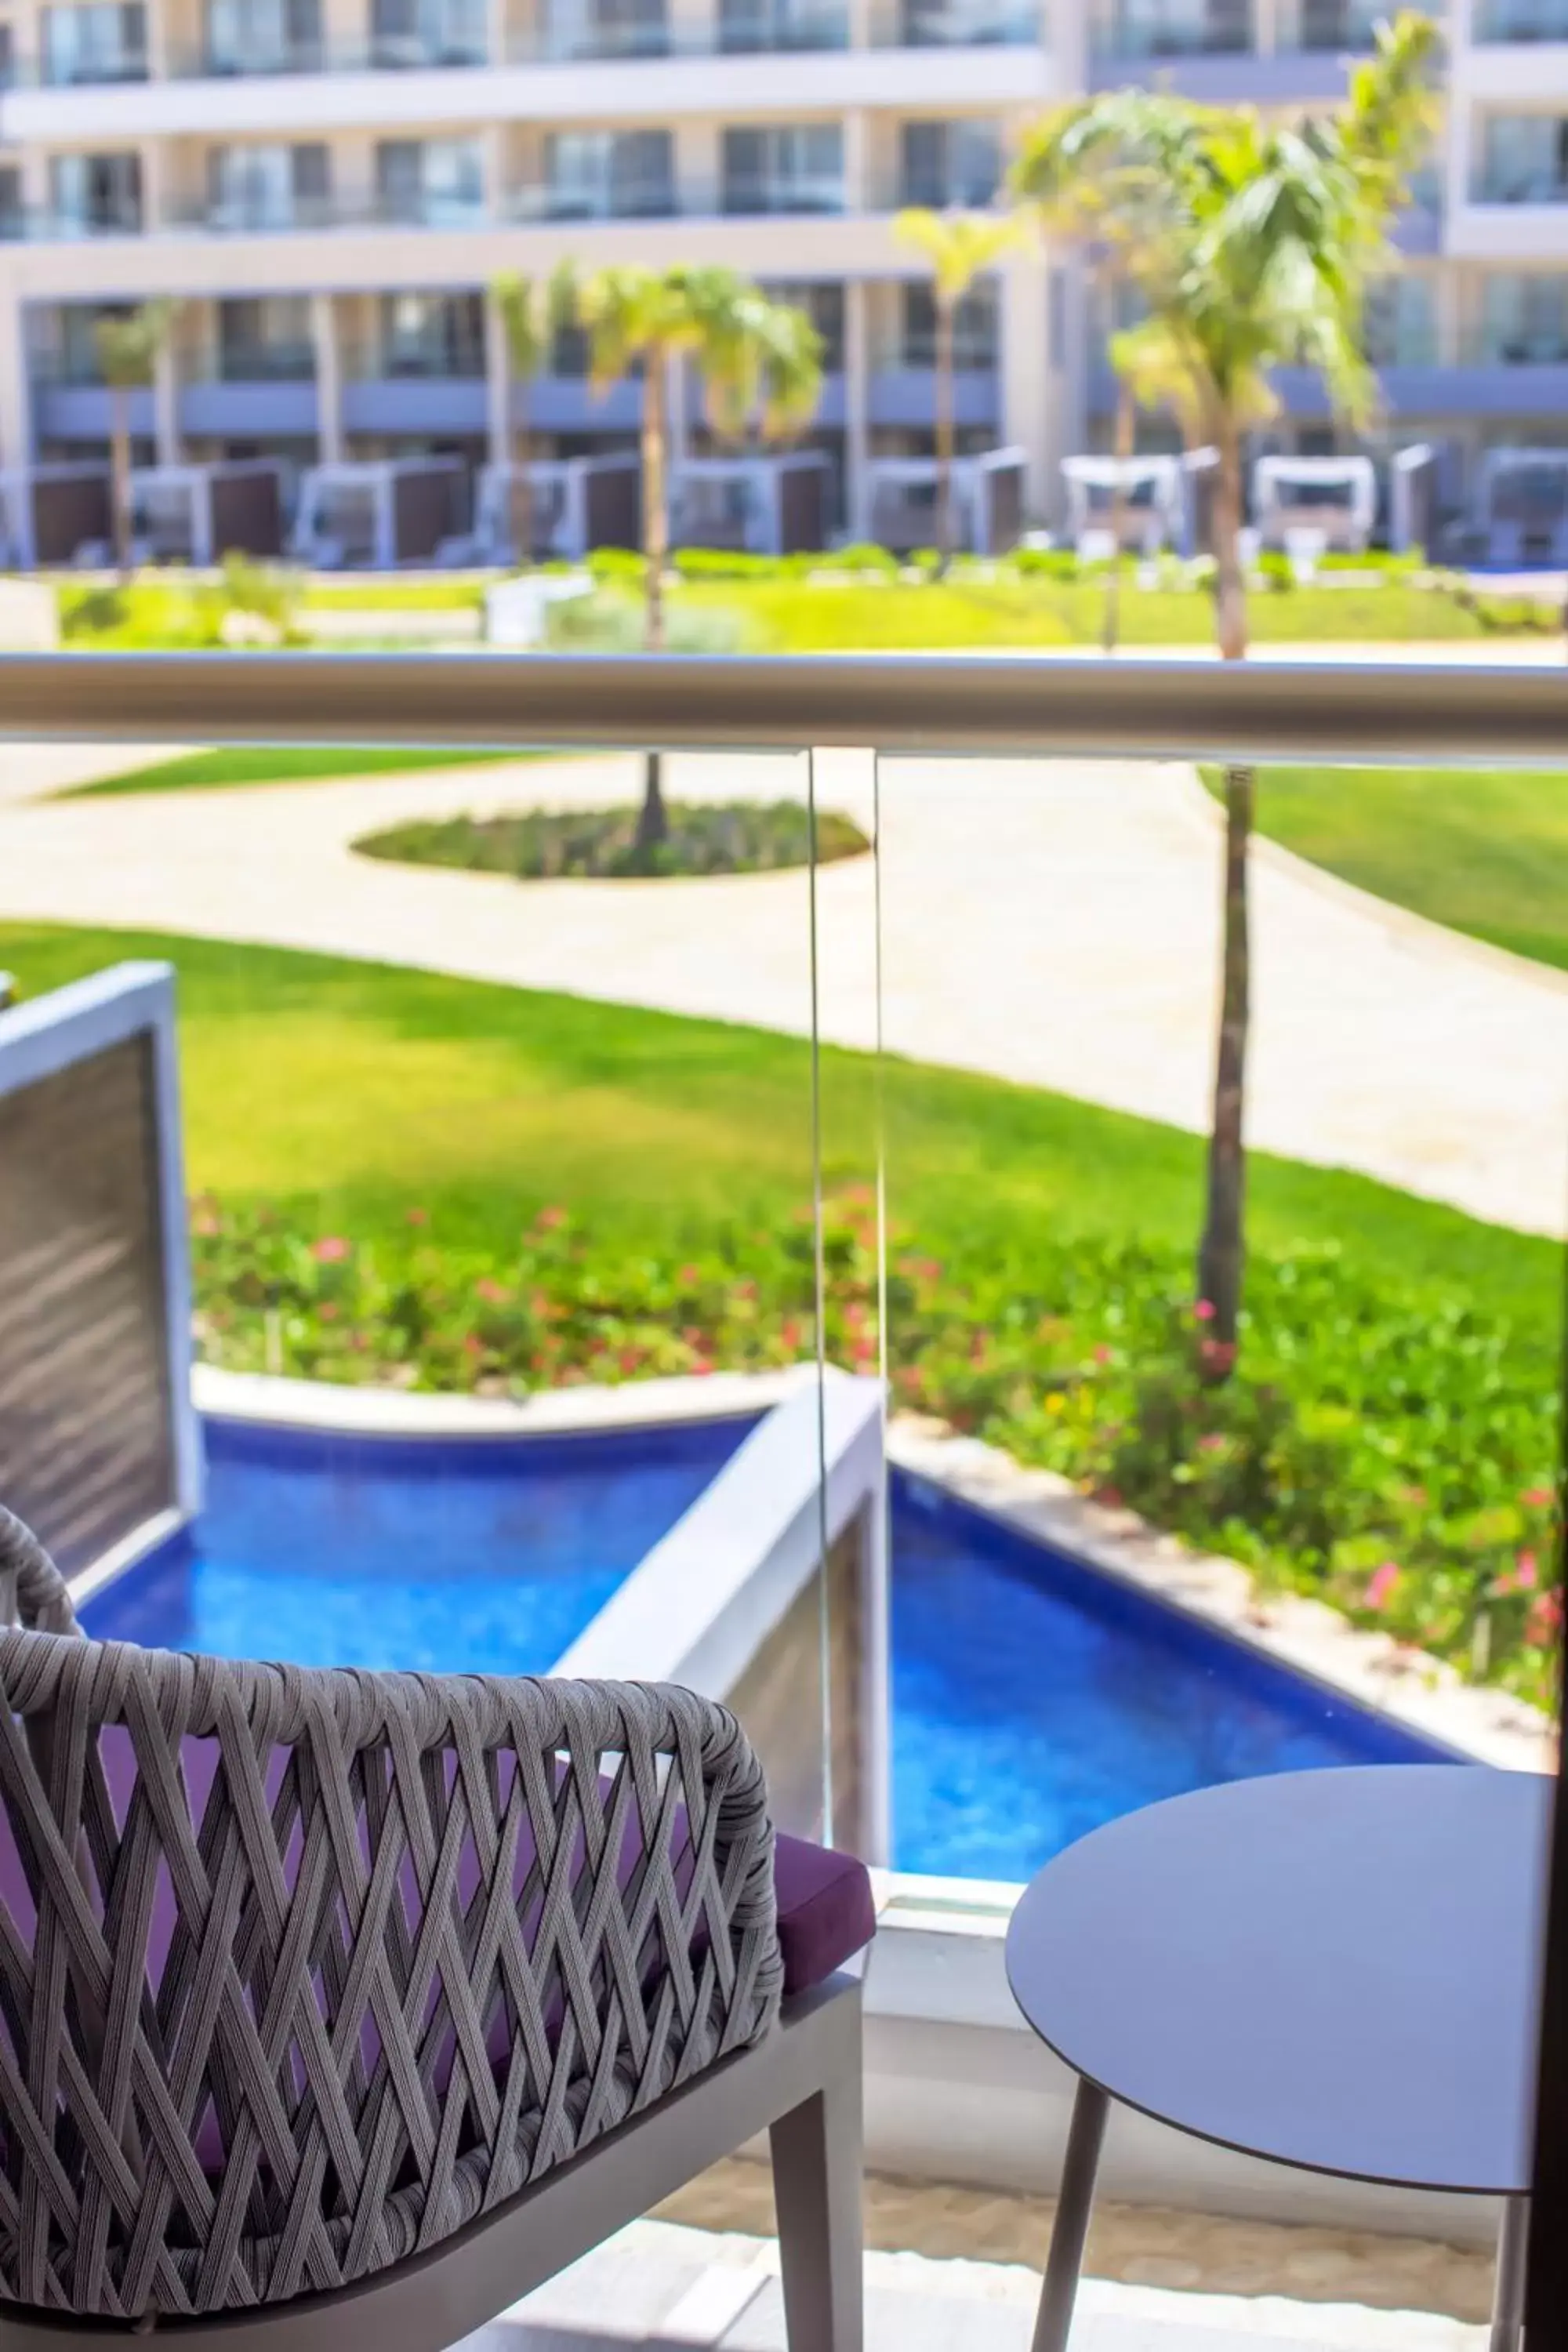 Balcony/Terrace, Swimming Pool in Planet Hollywood Cancun, An Autograph Collection All-Inclusive Resort